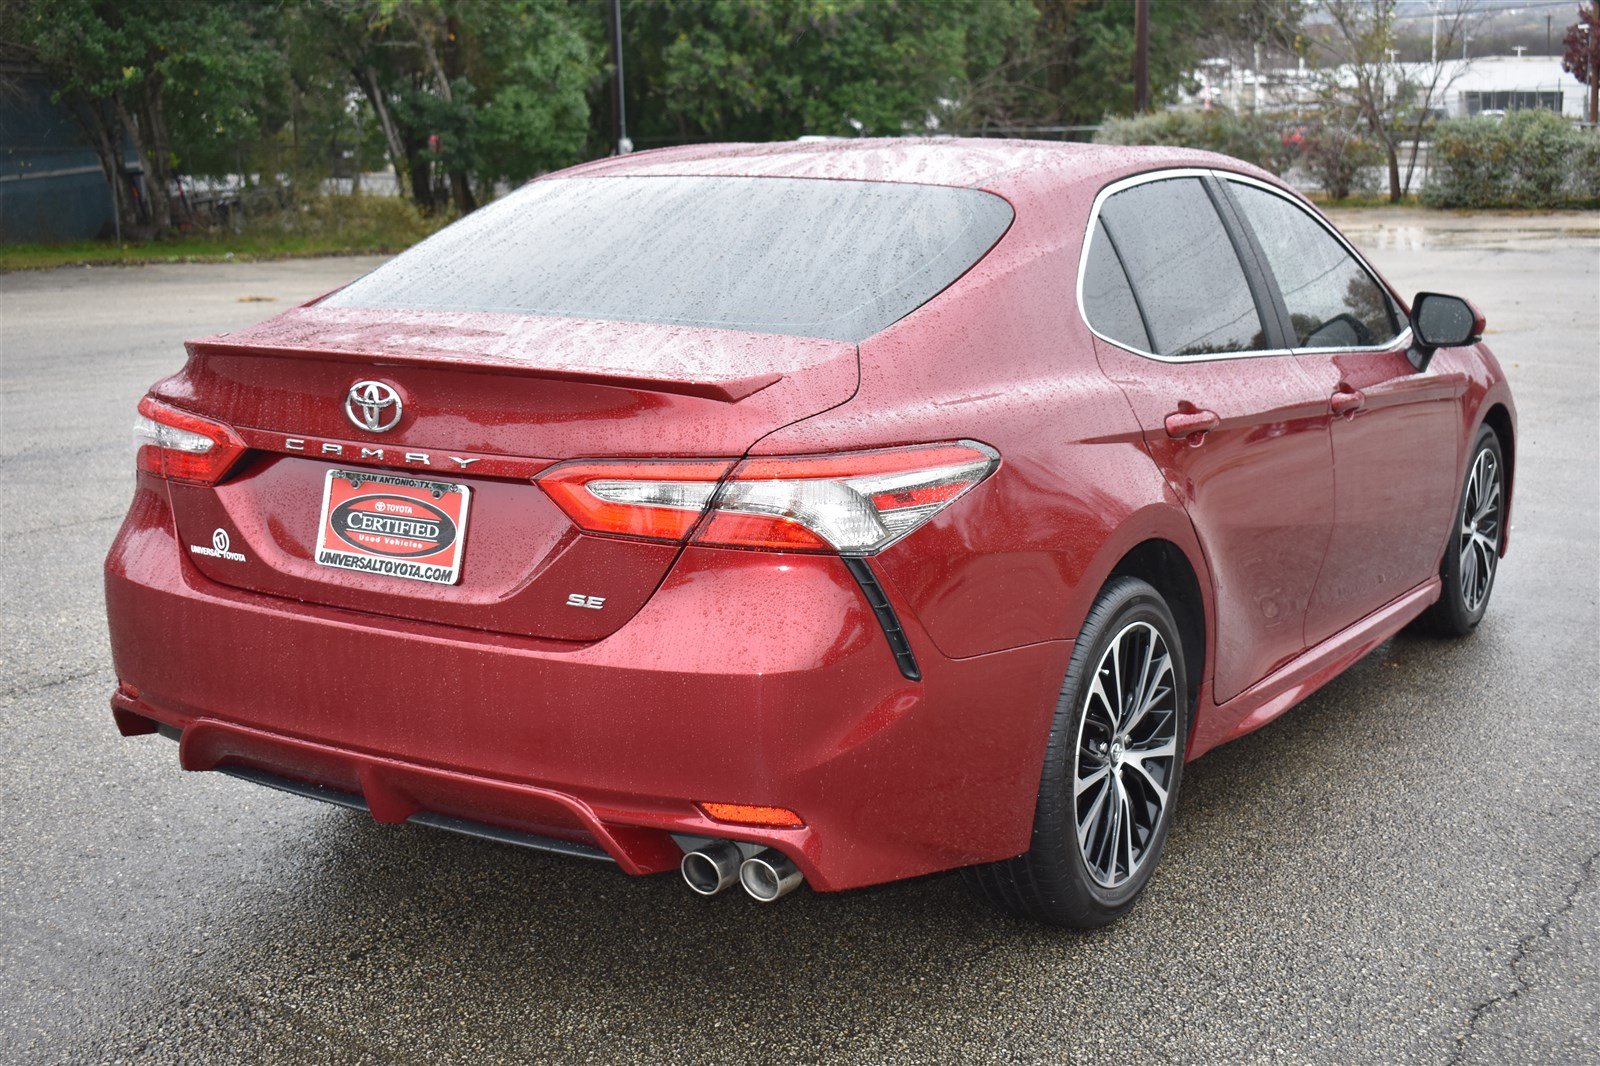 Pre-Owned 2018 Toyota Camry SE 4dr Car in San Antonio #42416 | Red ...